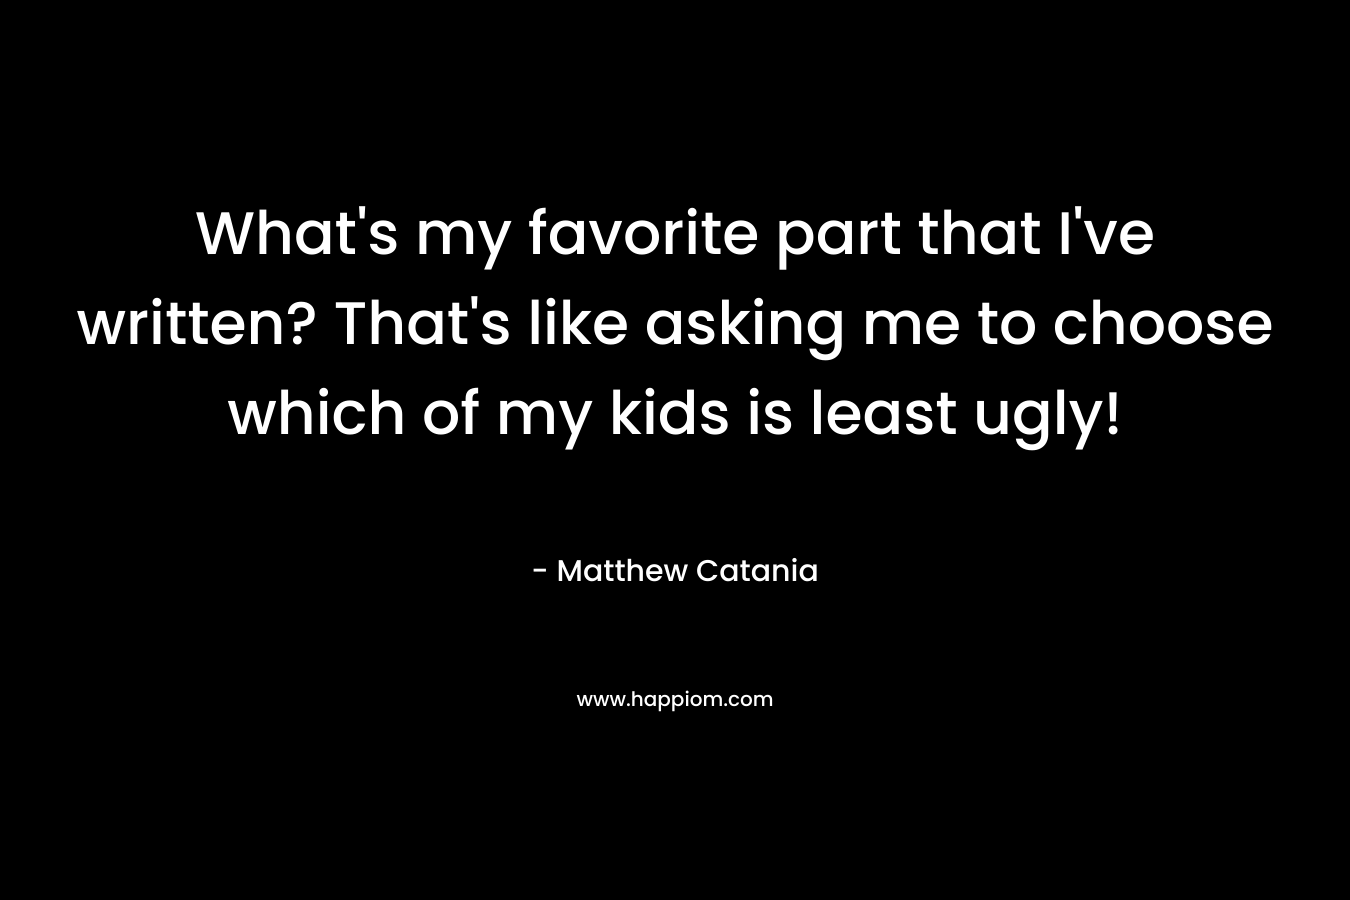 What’s my favorite part that I’ve written? That’s like asking me to choose which of my kids is least ugly! – Matthew Catania